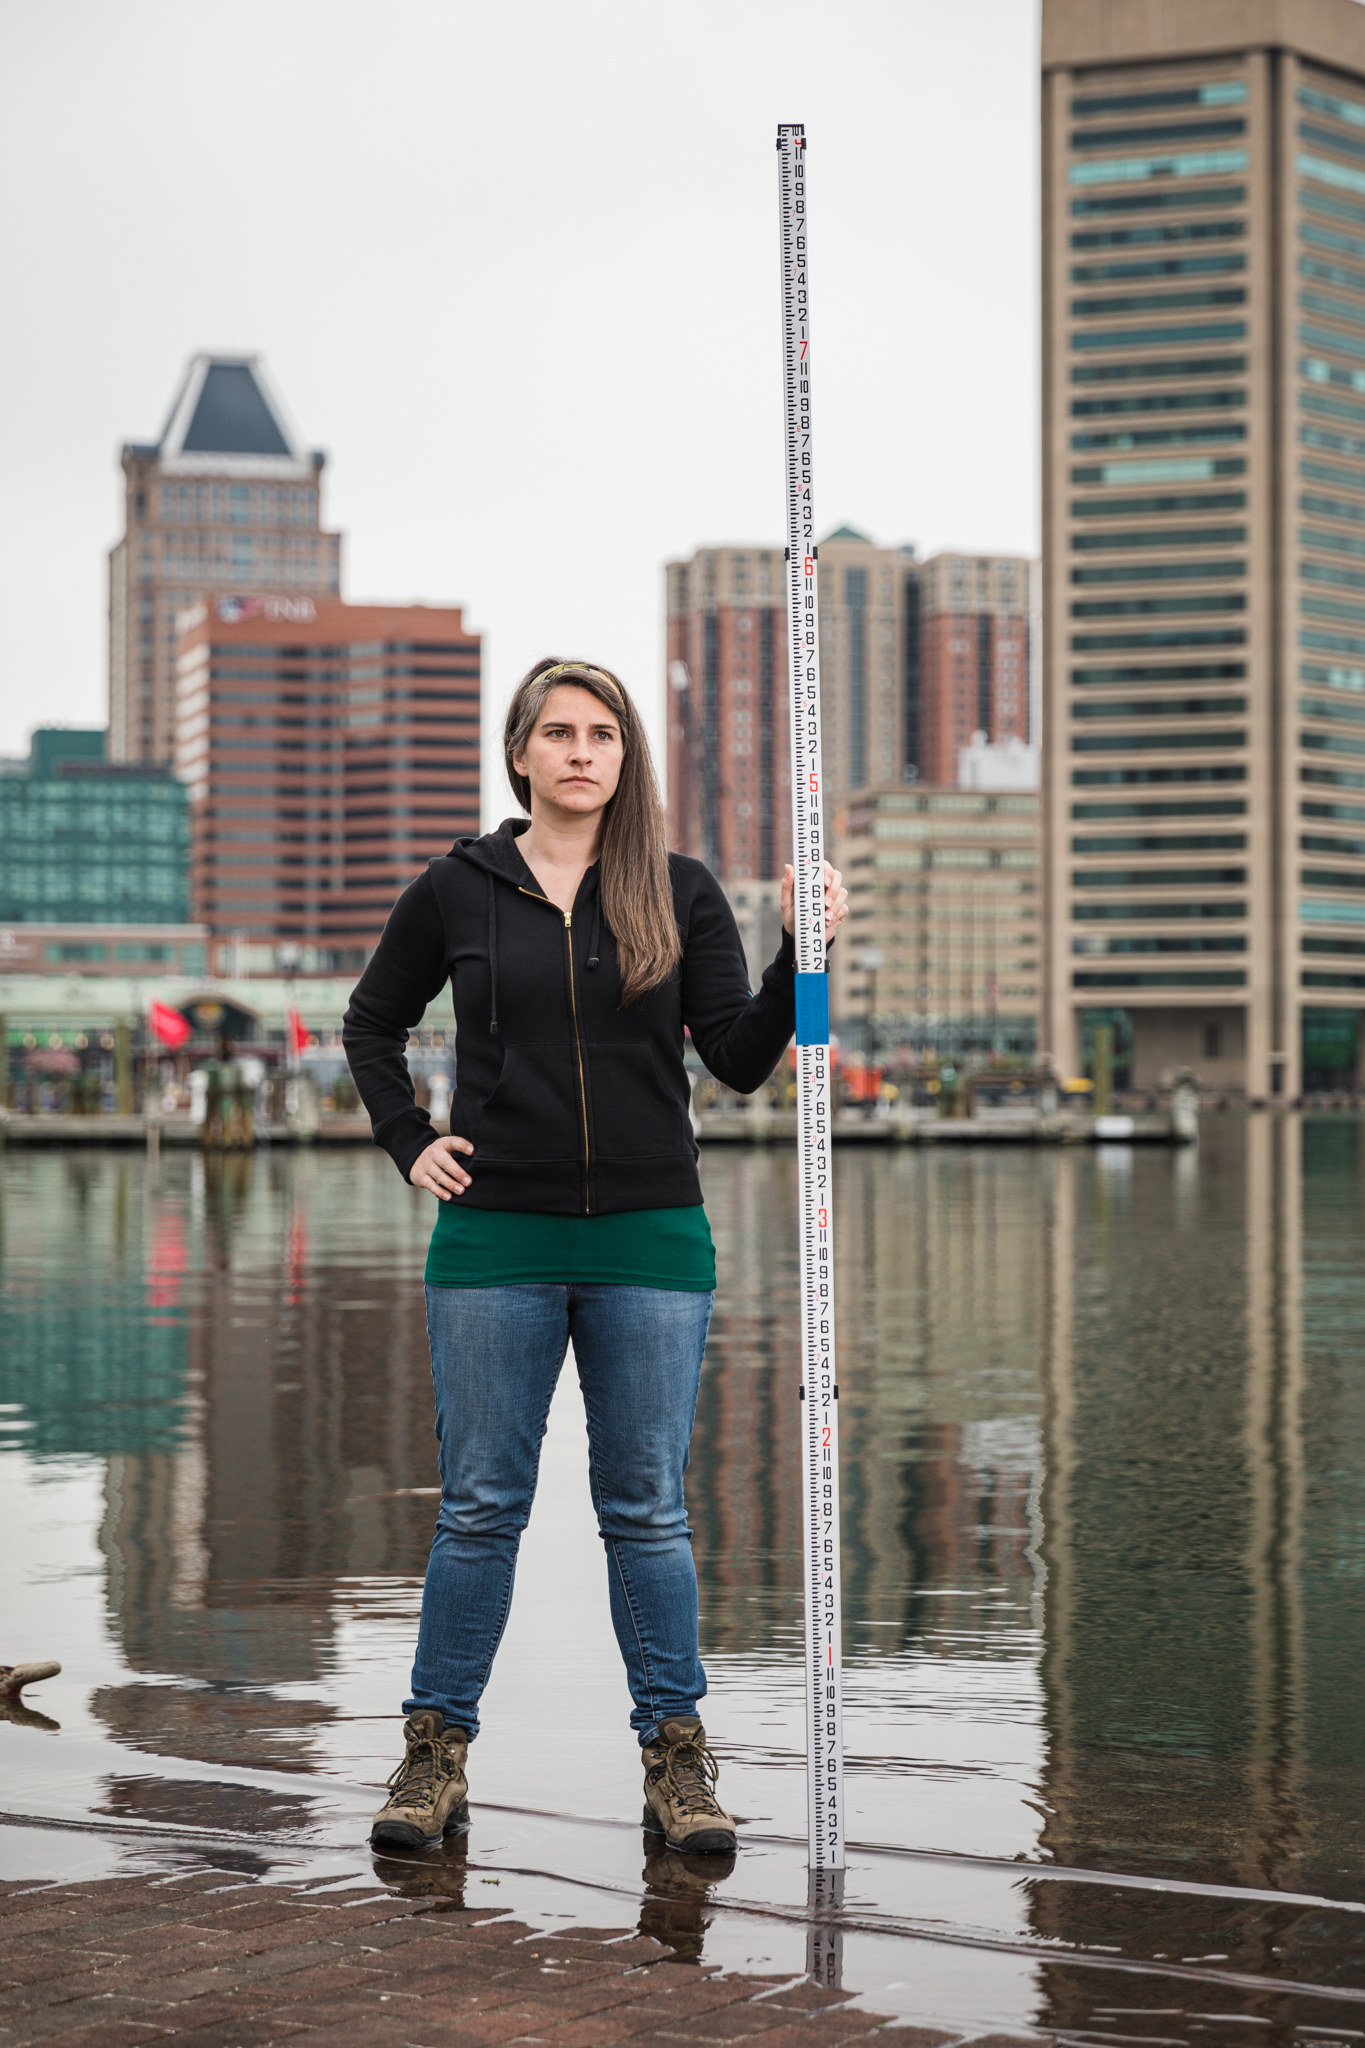 A woman stands in front of the Baltimore skyline, the water lapping at her feet.